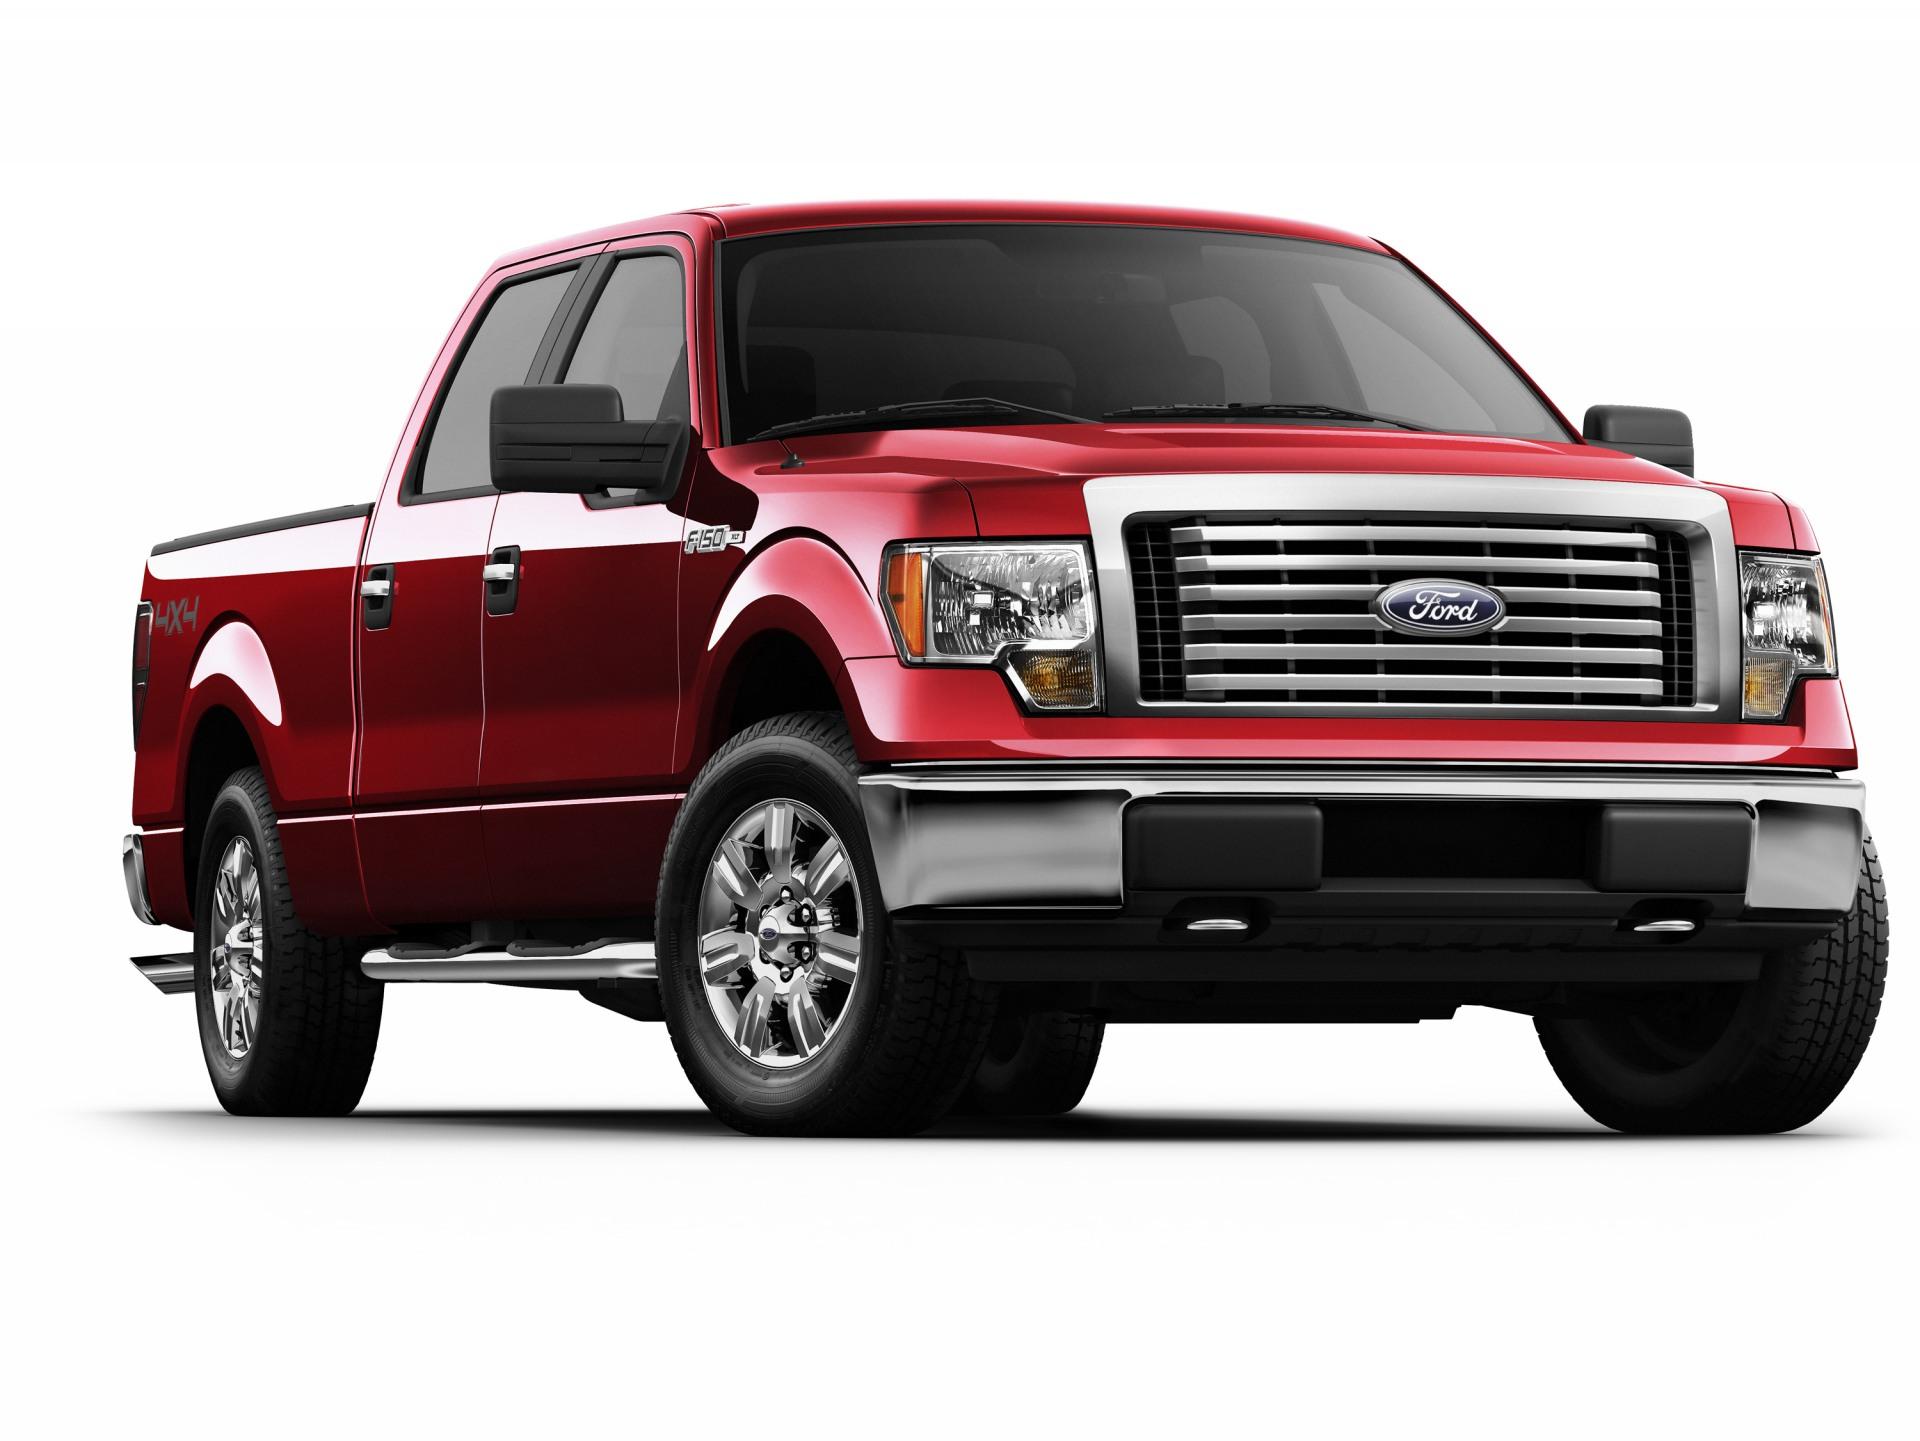 ford f150 truck hd desktop wallpaper download this wallpaper for free